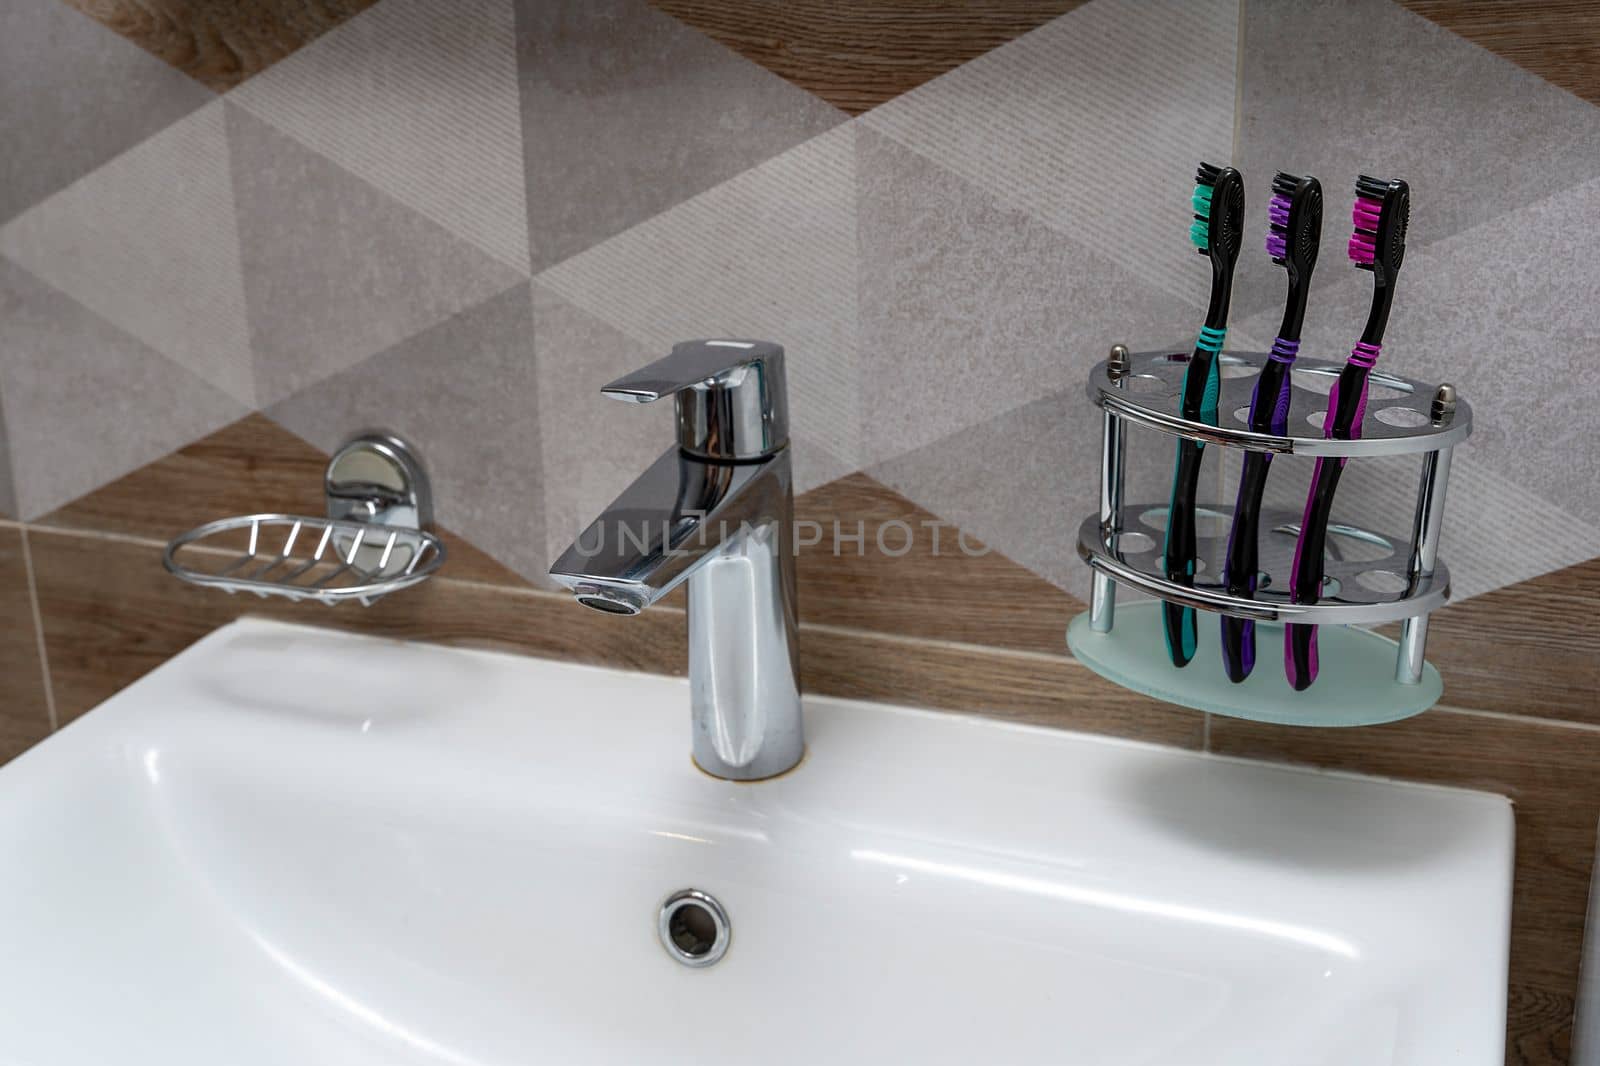 toothbrushes stand on a special stand in the bathroom interior by audiznam2609